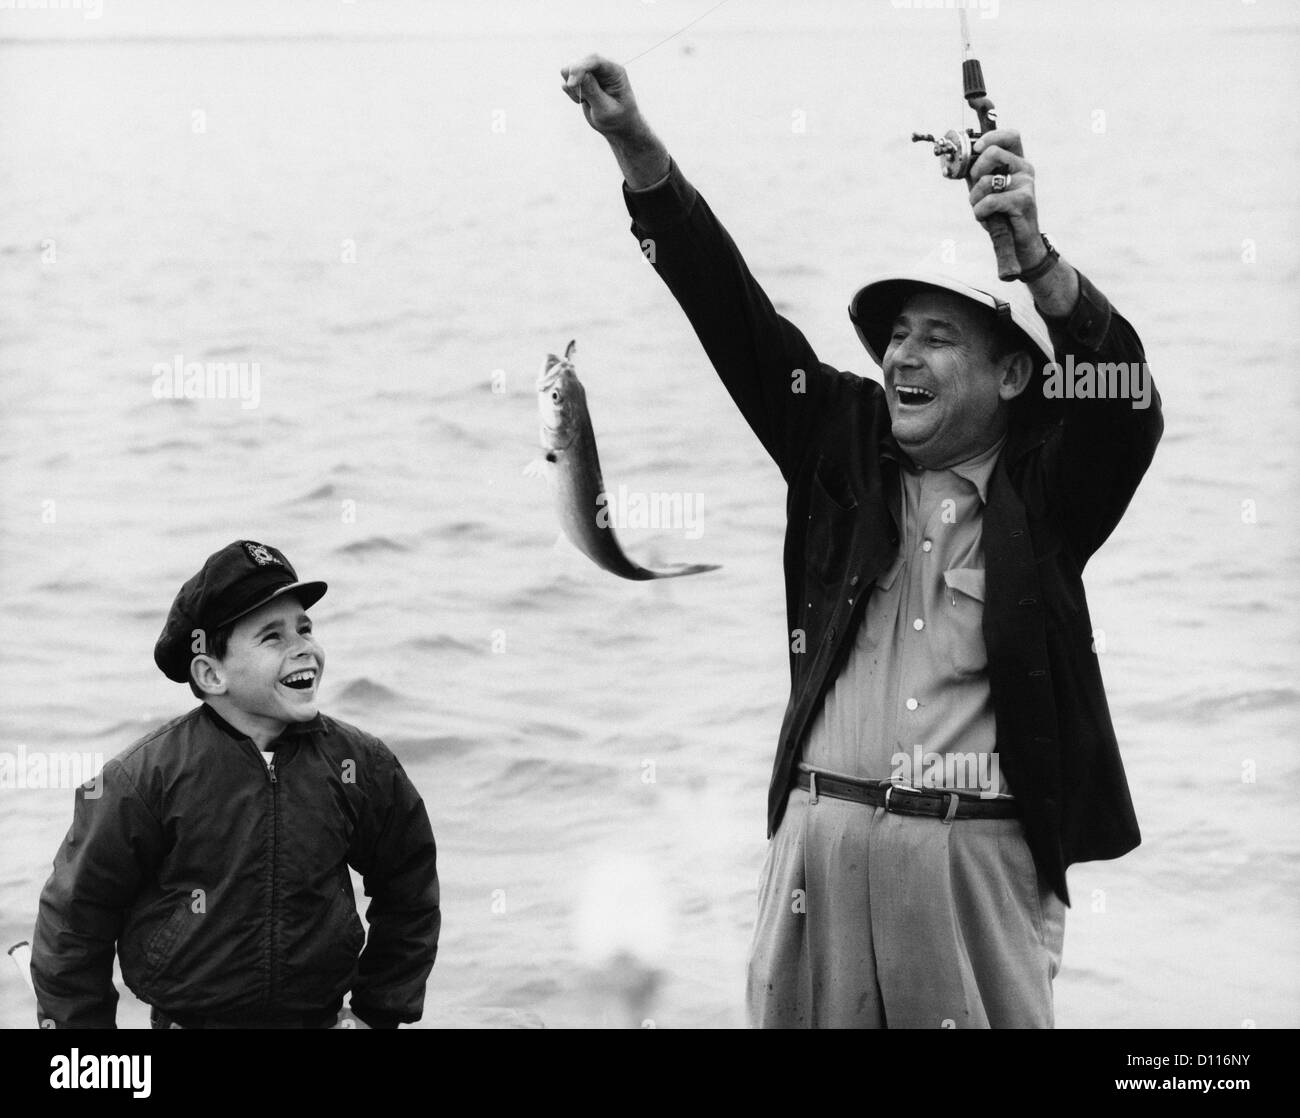 Men holding fishing rods Black and White Stock Photos & Images - Alamy